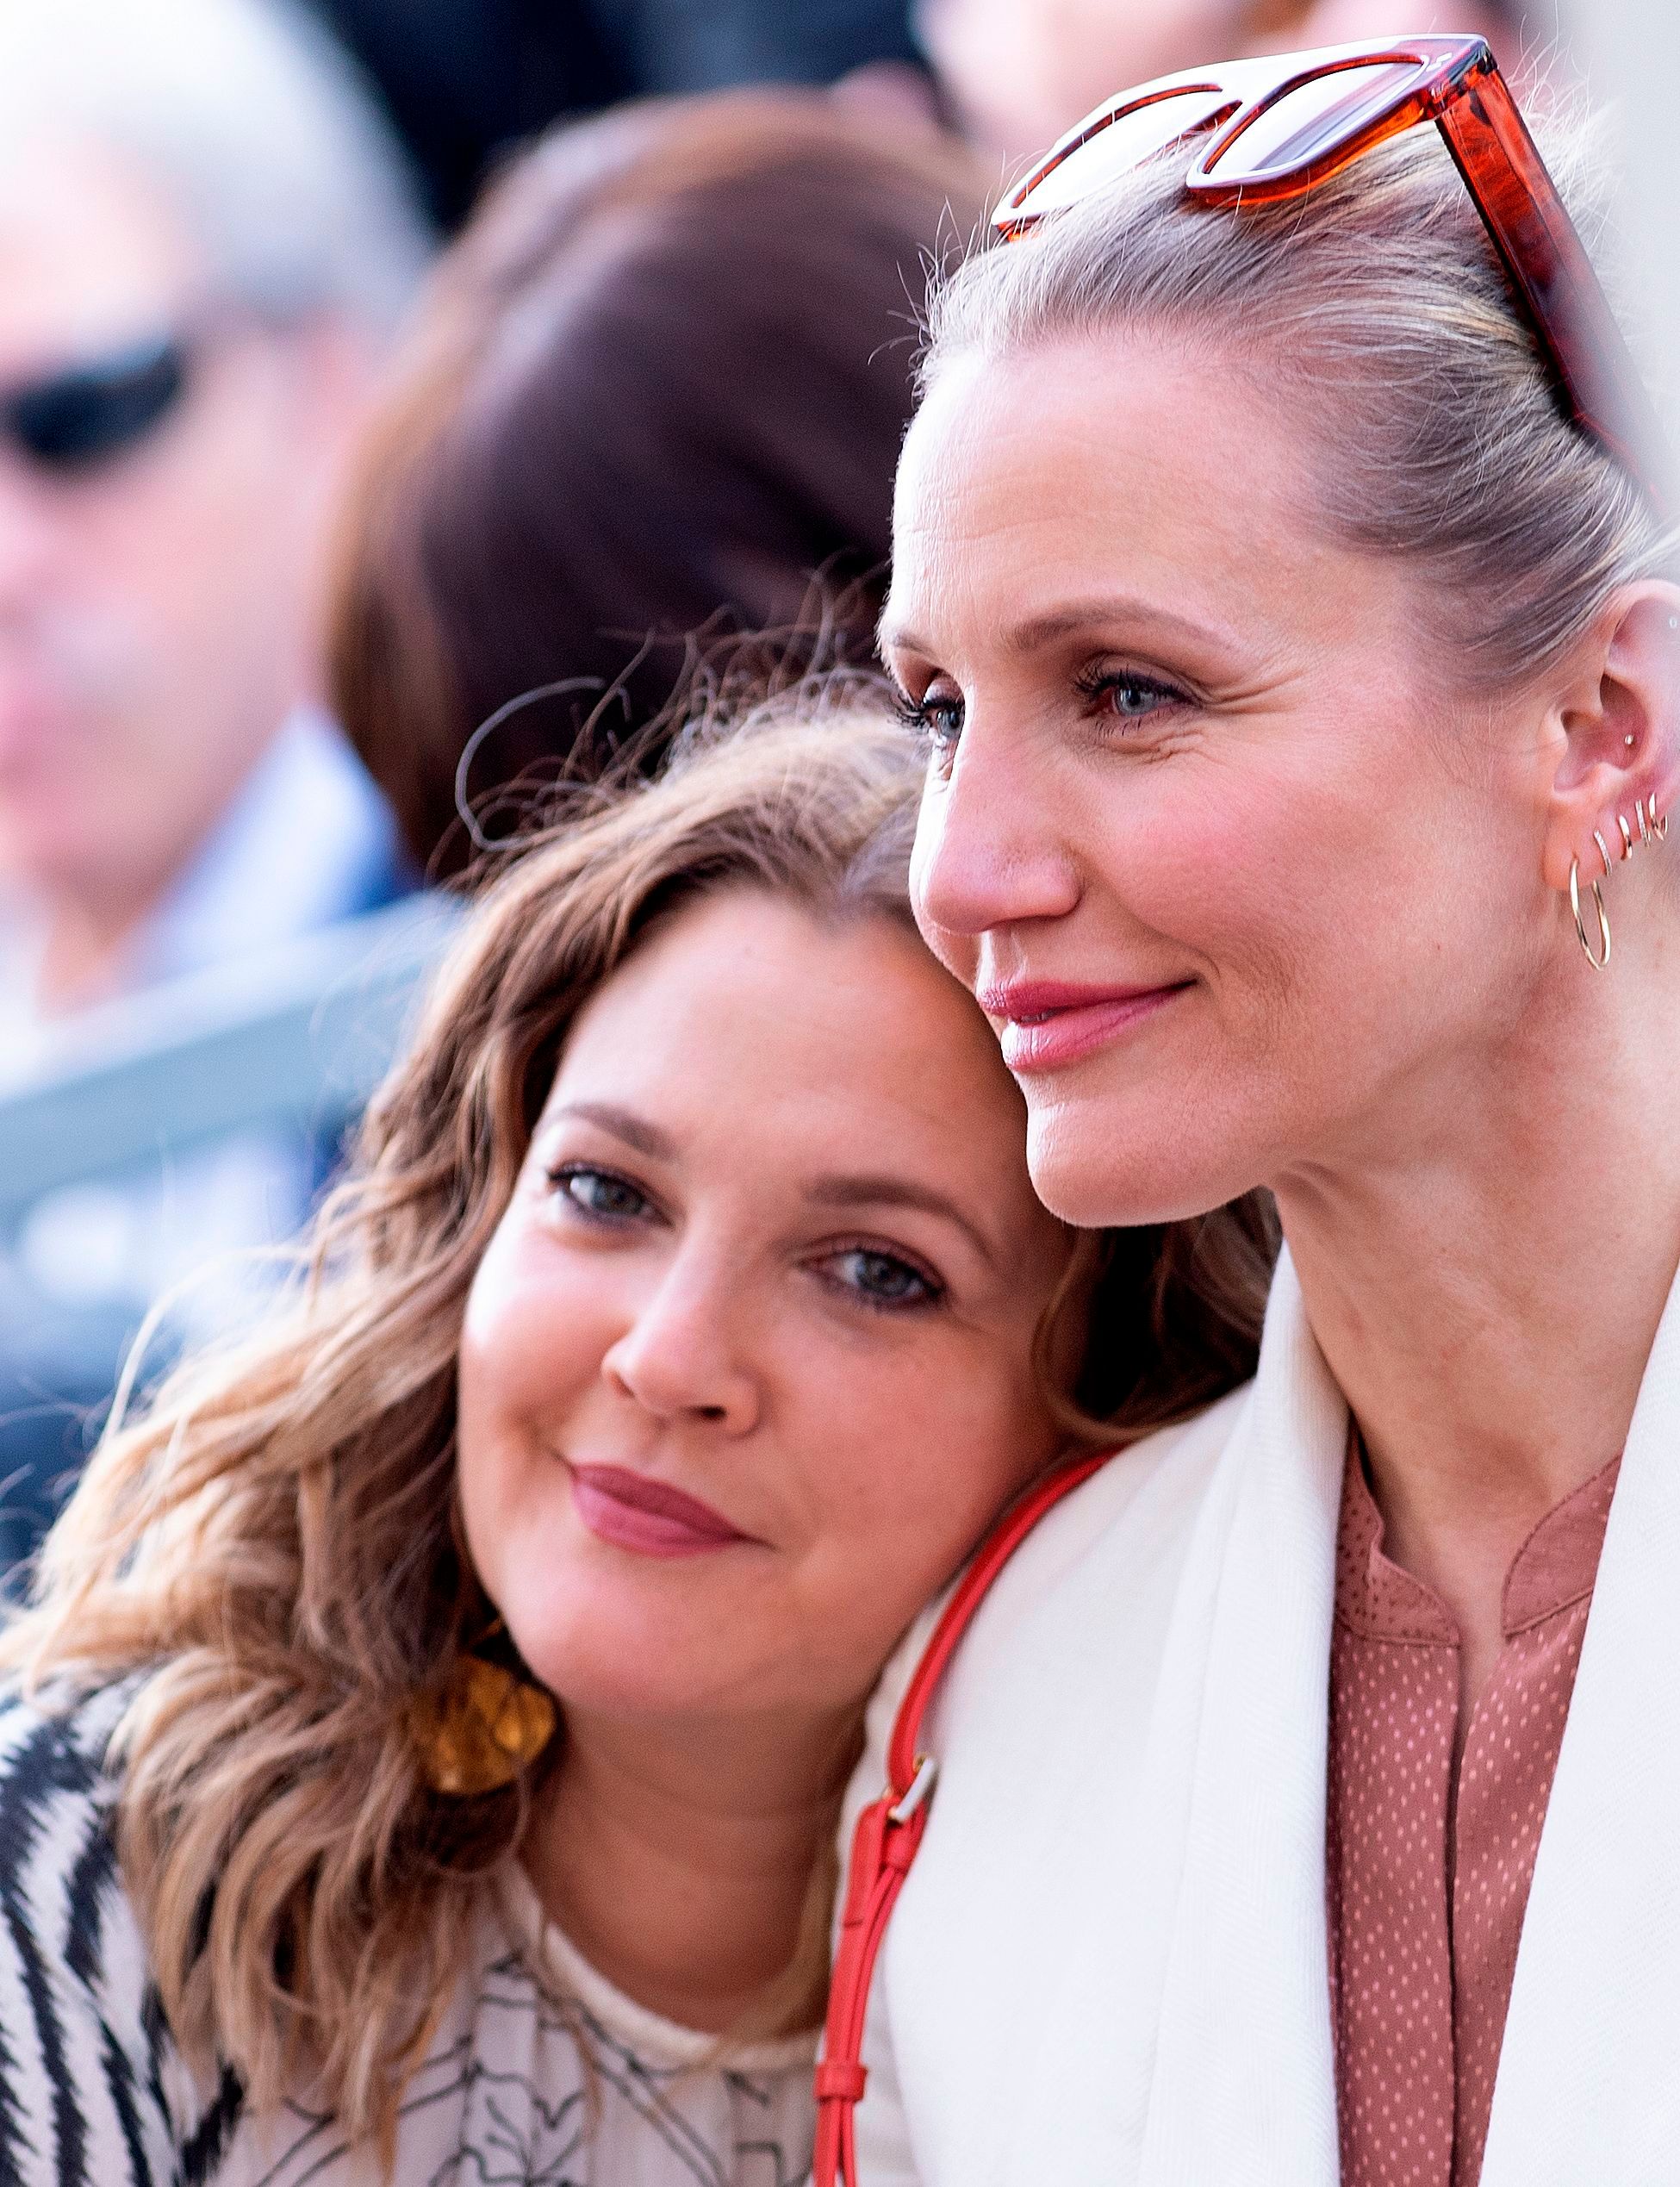 Drew Barrymore and Cameron Diaz during Lucy Liu's Walk of Fame ceremony in Hollywood on May 1, 2019. | Source: Getty Images